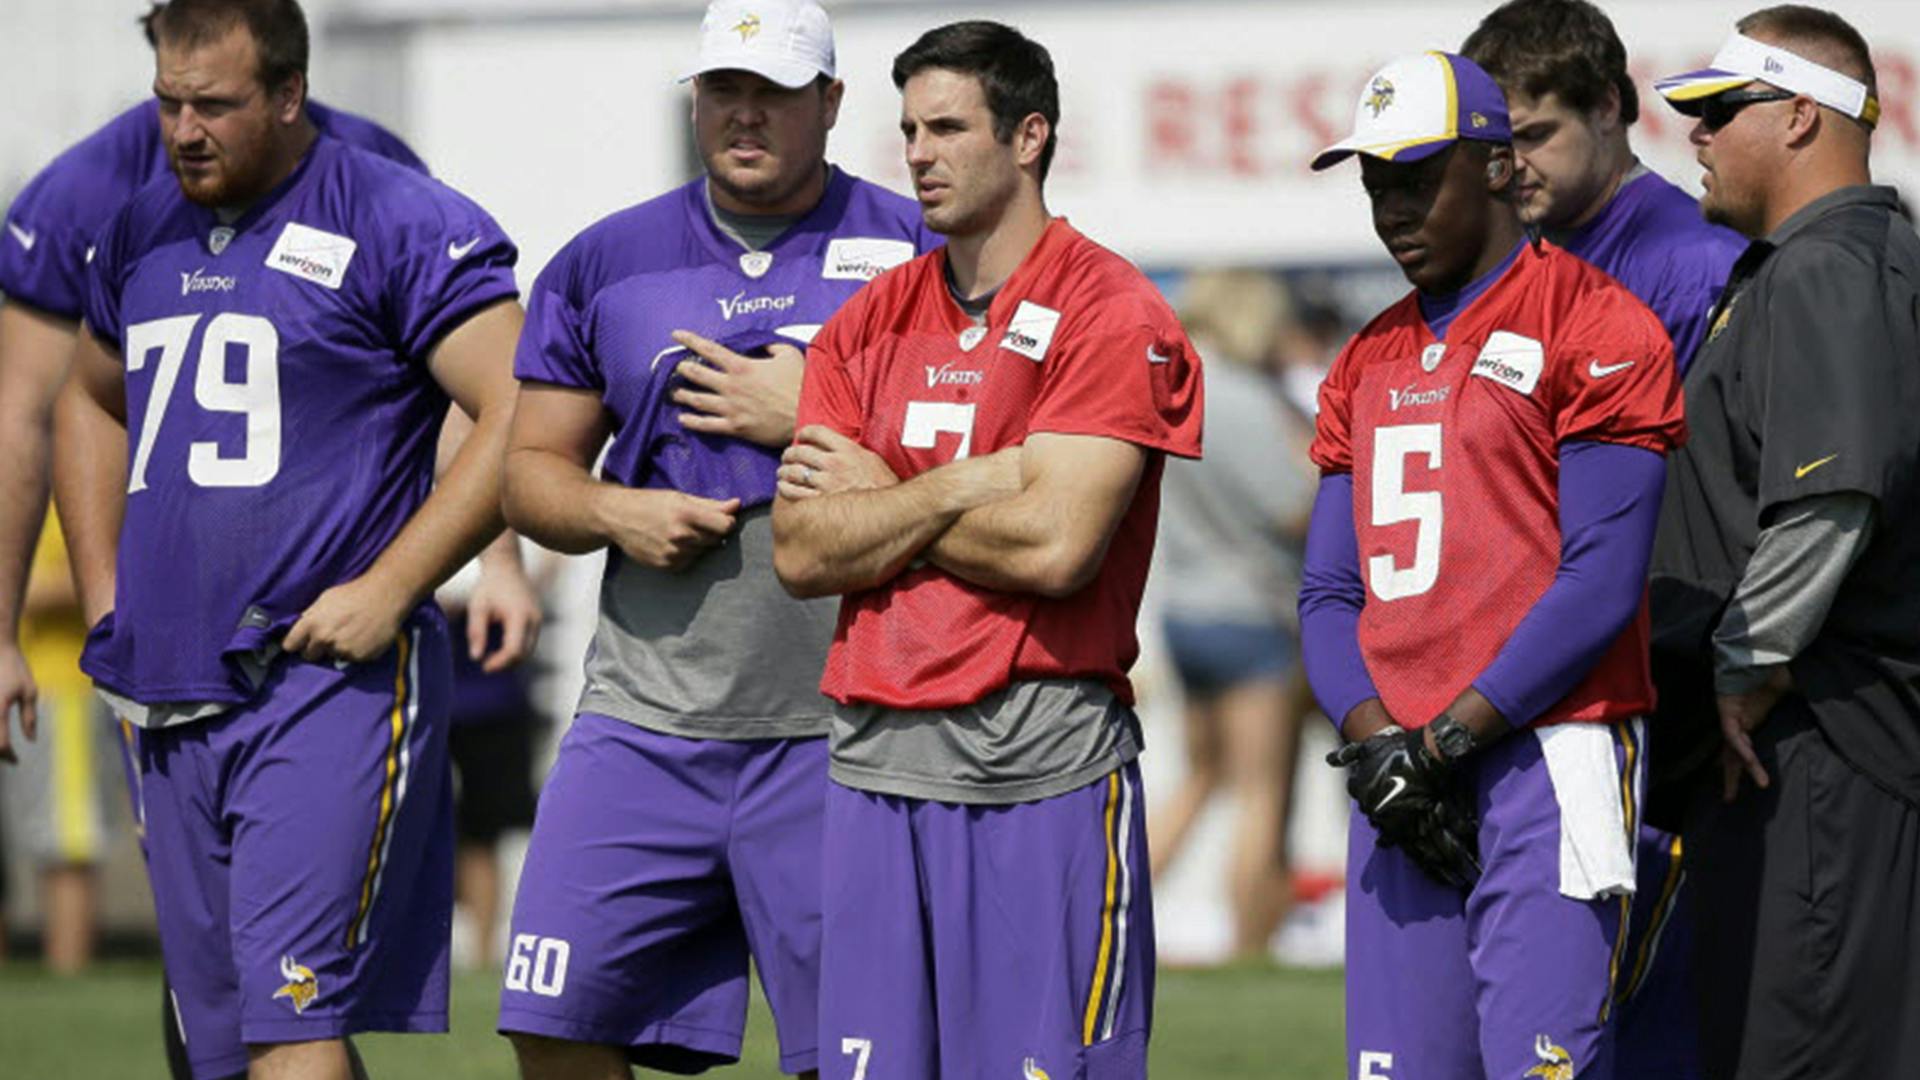 We take a look at what role Vikings quarterback Christian Ponder takes now that Matt Cassel and Teddy Bridgewater are on the roster.